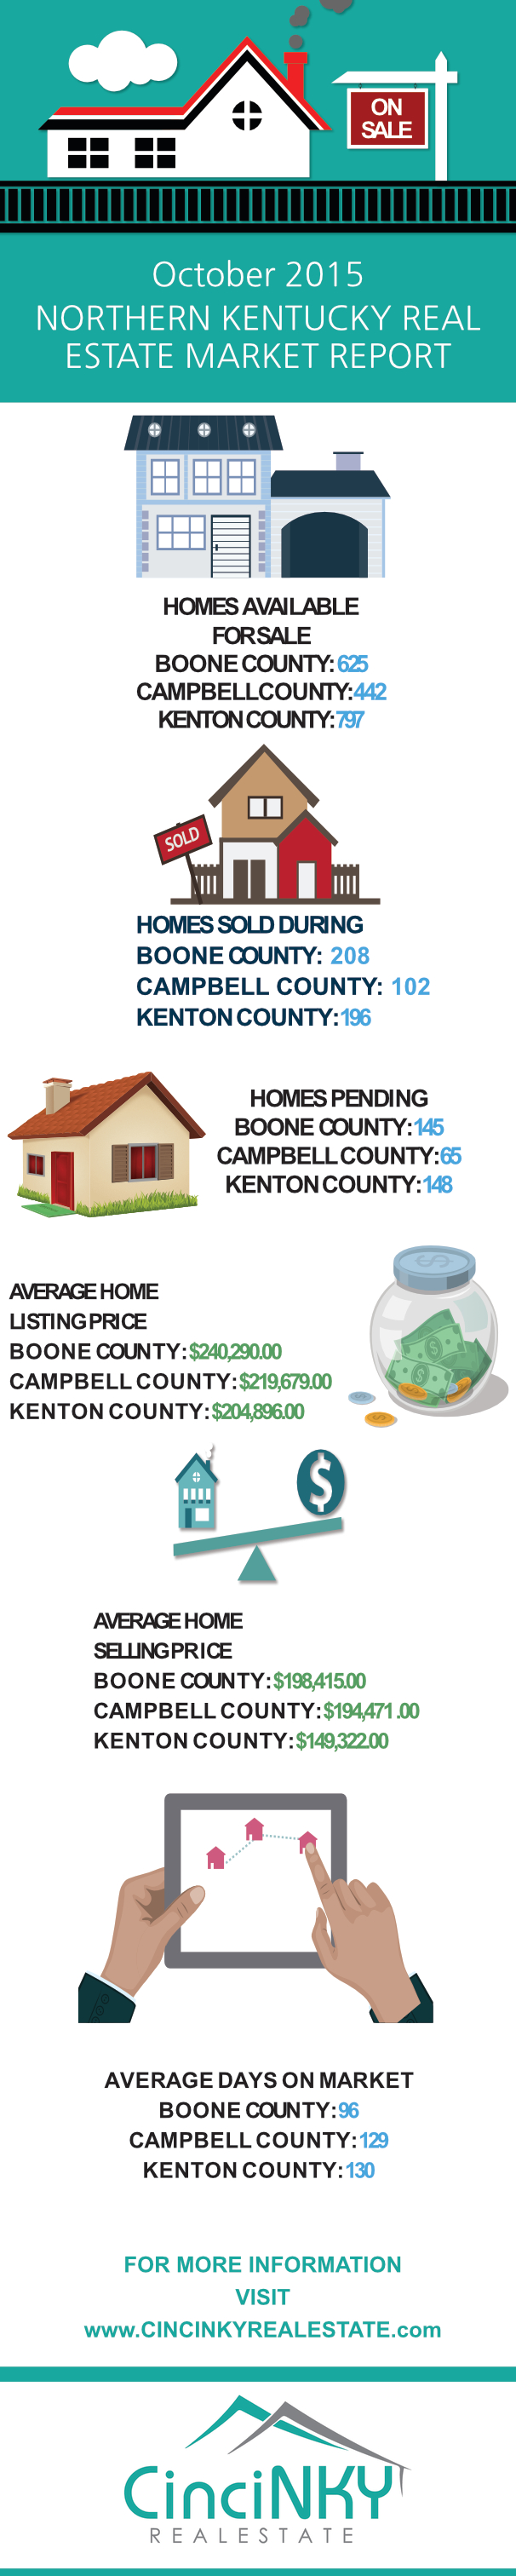 Northern Kentucky Real Estate Sales Report October 2015 infographic